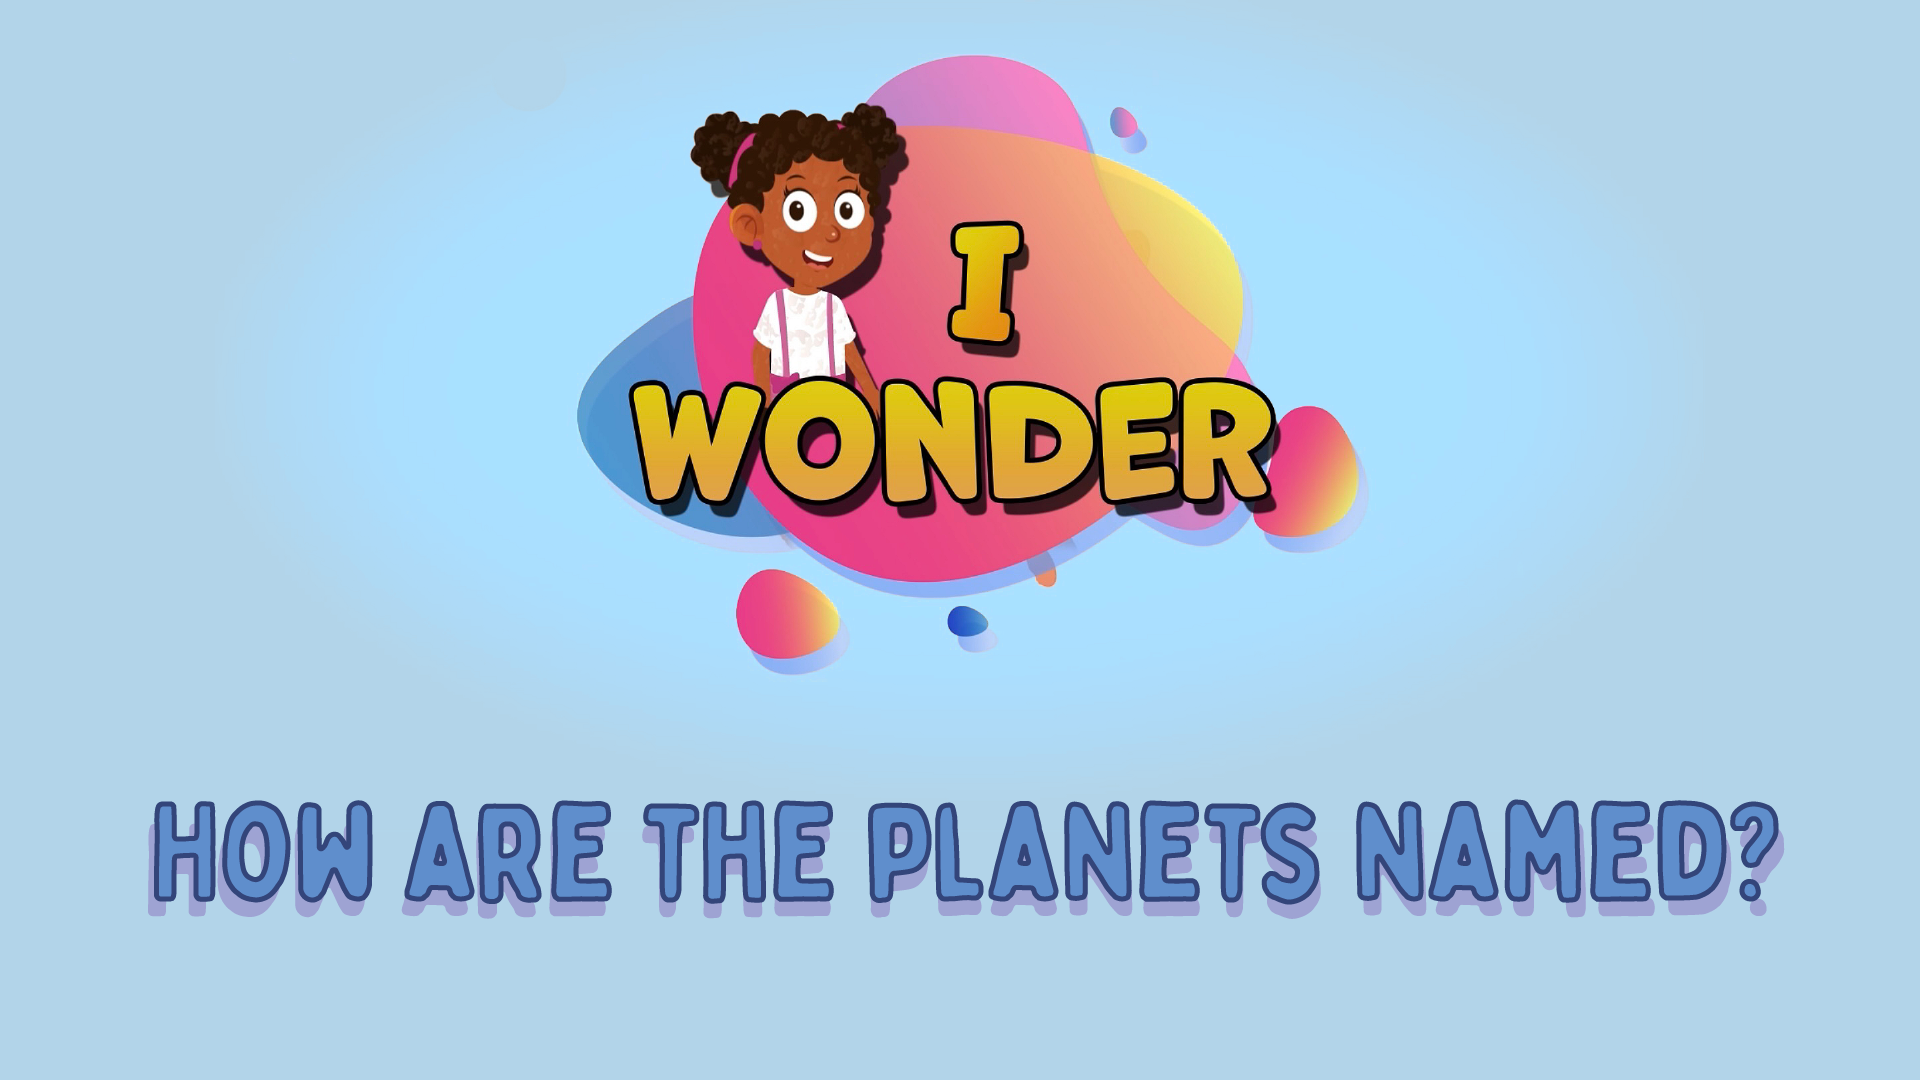 How Are The Planets Named?